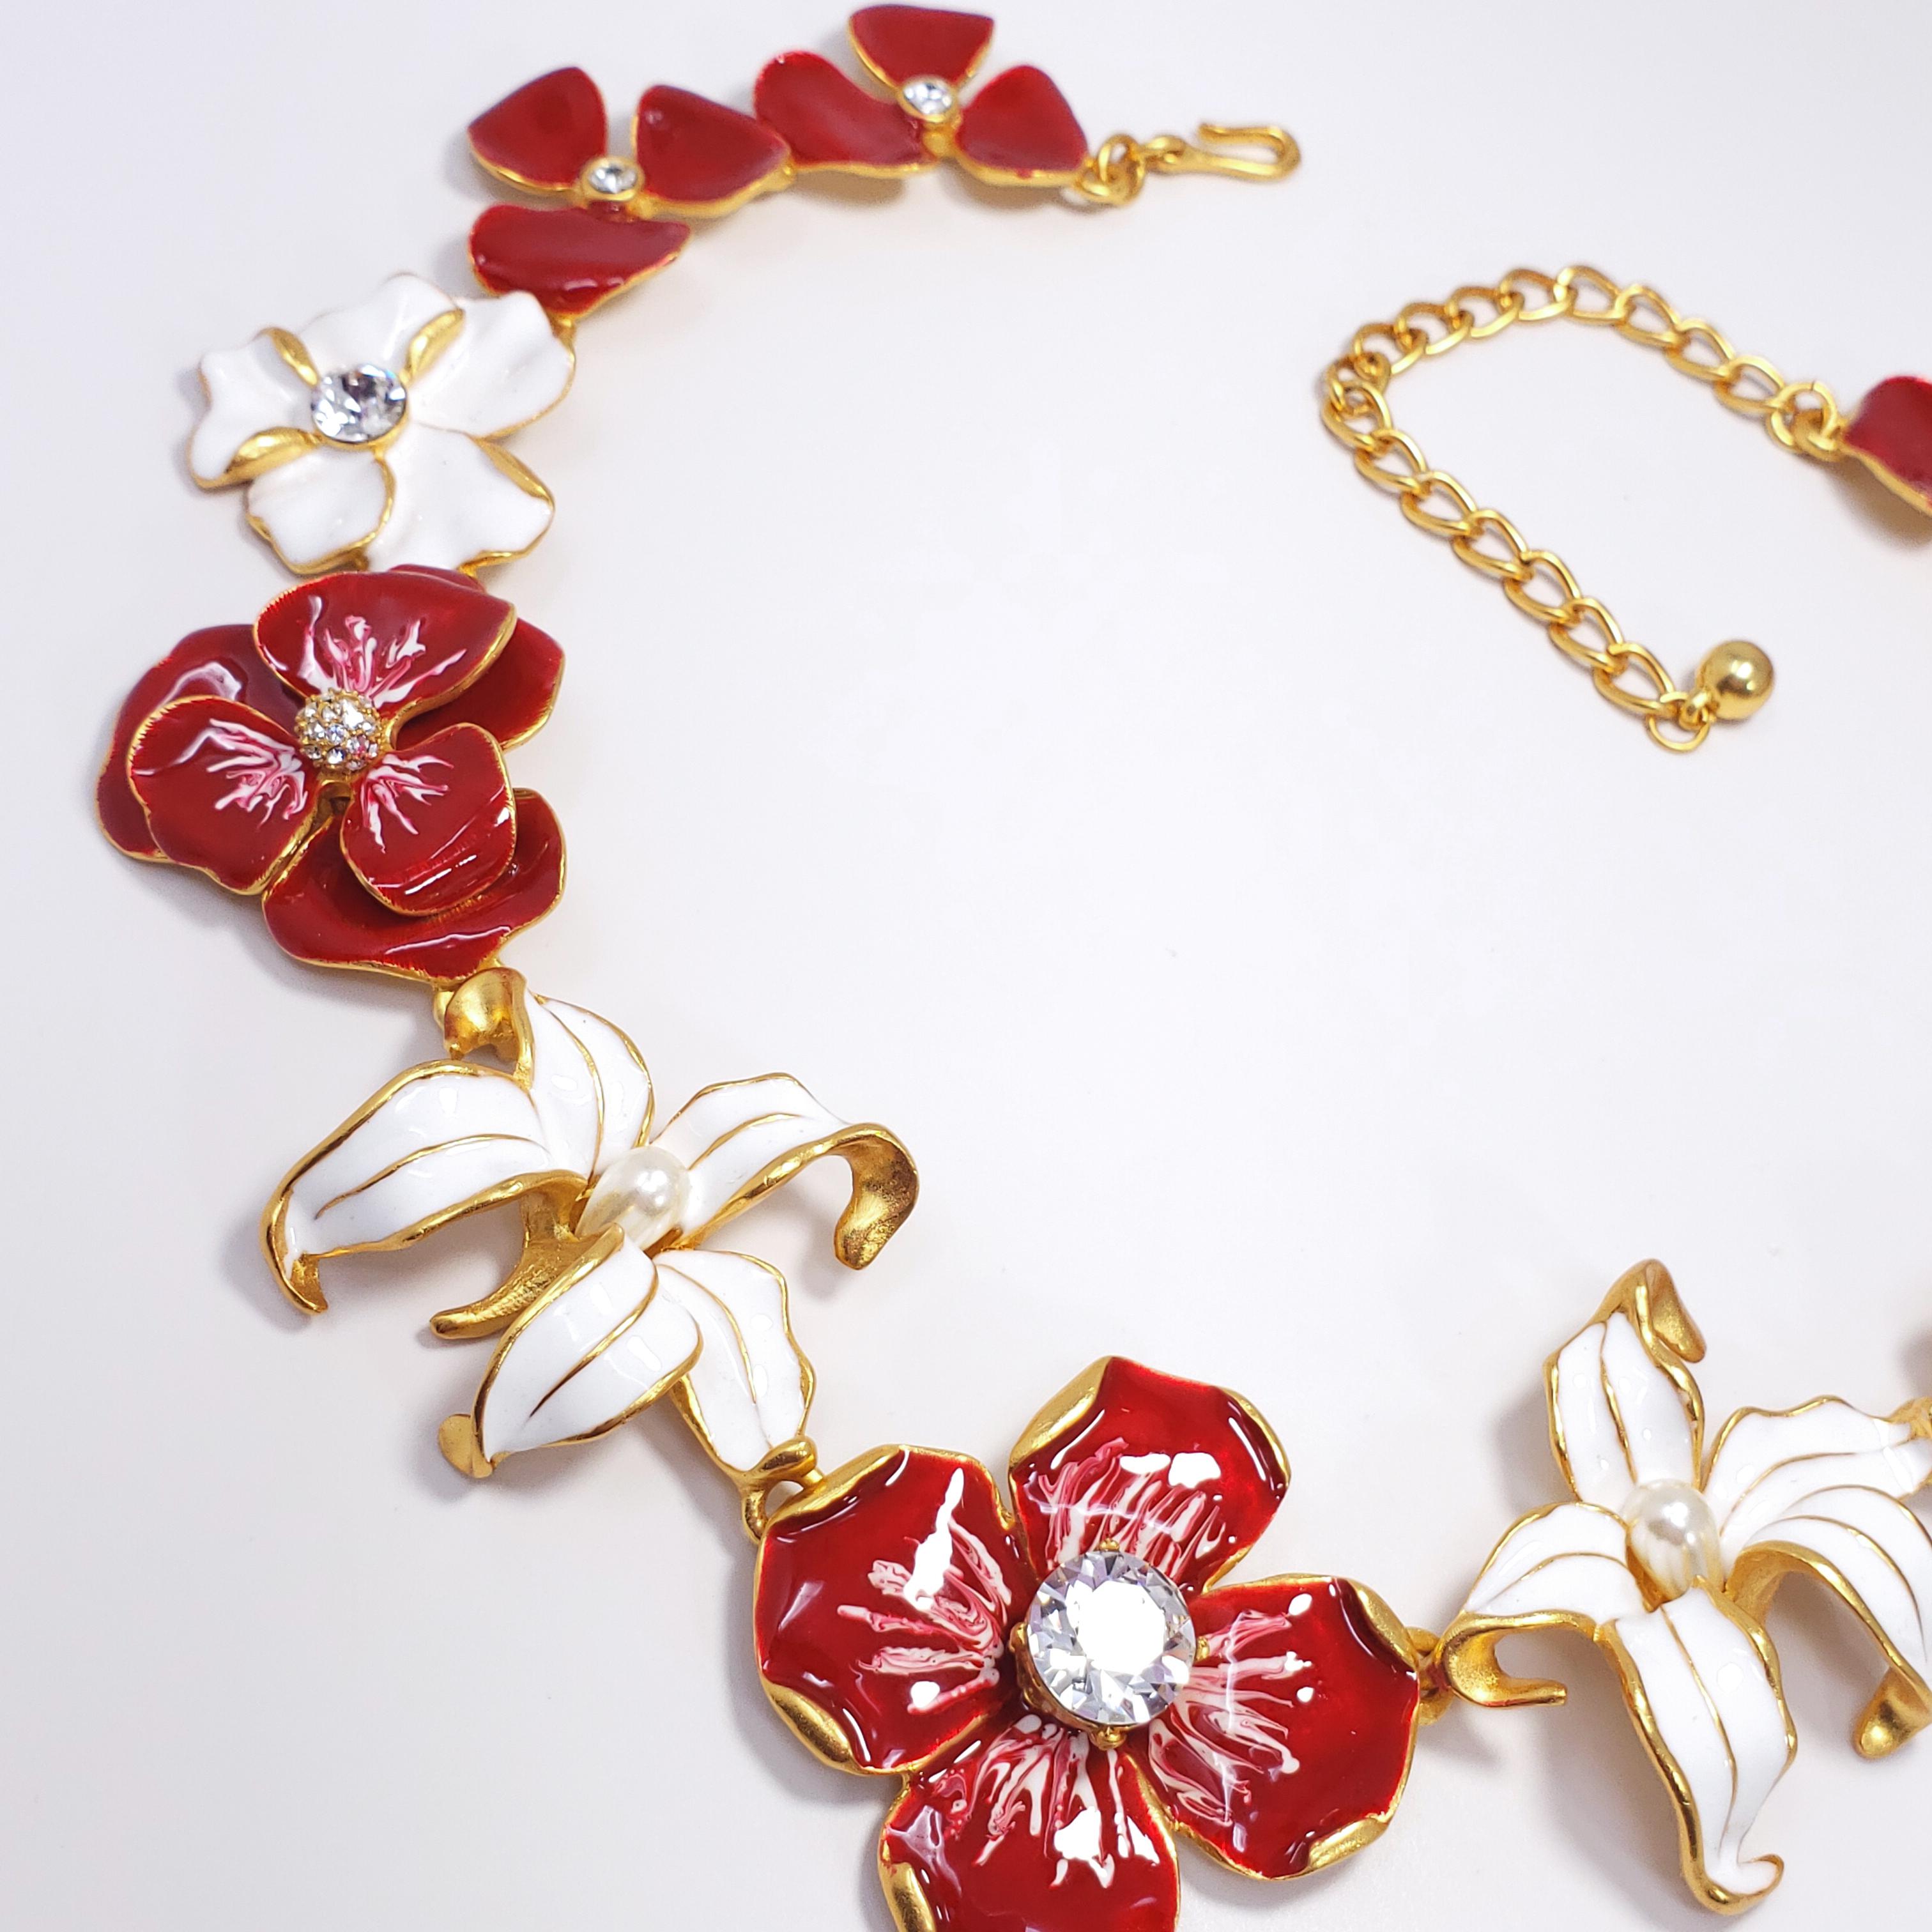 This textured 22K gold-plated metal features an assortment of linked white and red enameled flowers, accented with crystals and faux pearls. By Kenneth Jay Lane, made in USA.

Weight: 119 g
Hallmarks: Kenneth © Lane
Flower sizes from 2.6 to 4.1